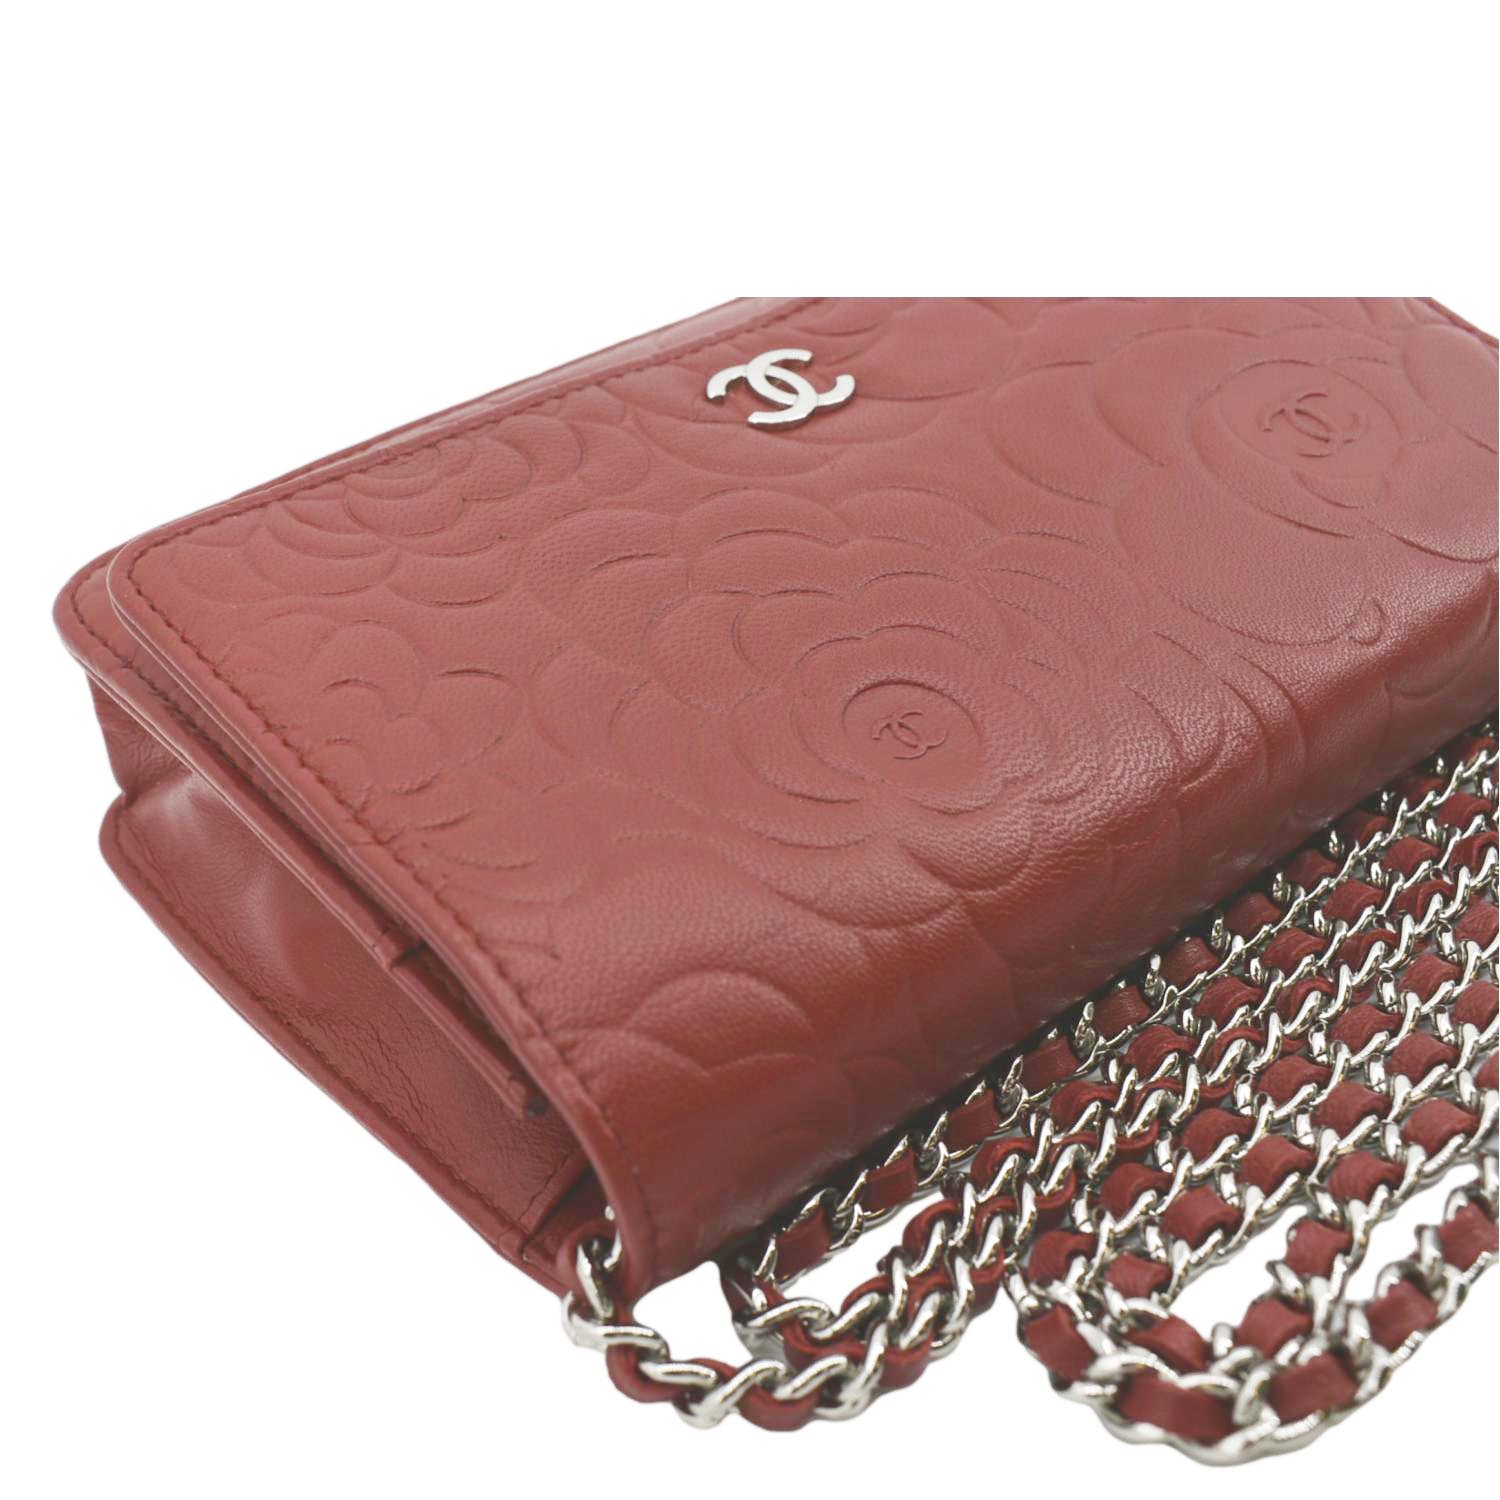 Wallet On Chain leather crossbody bag